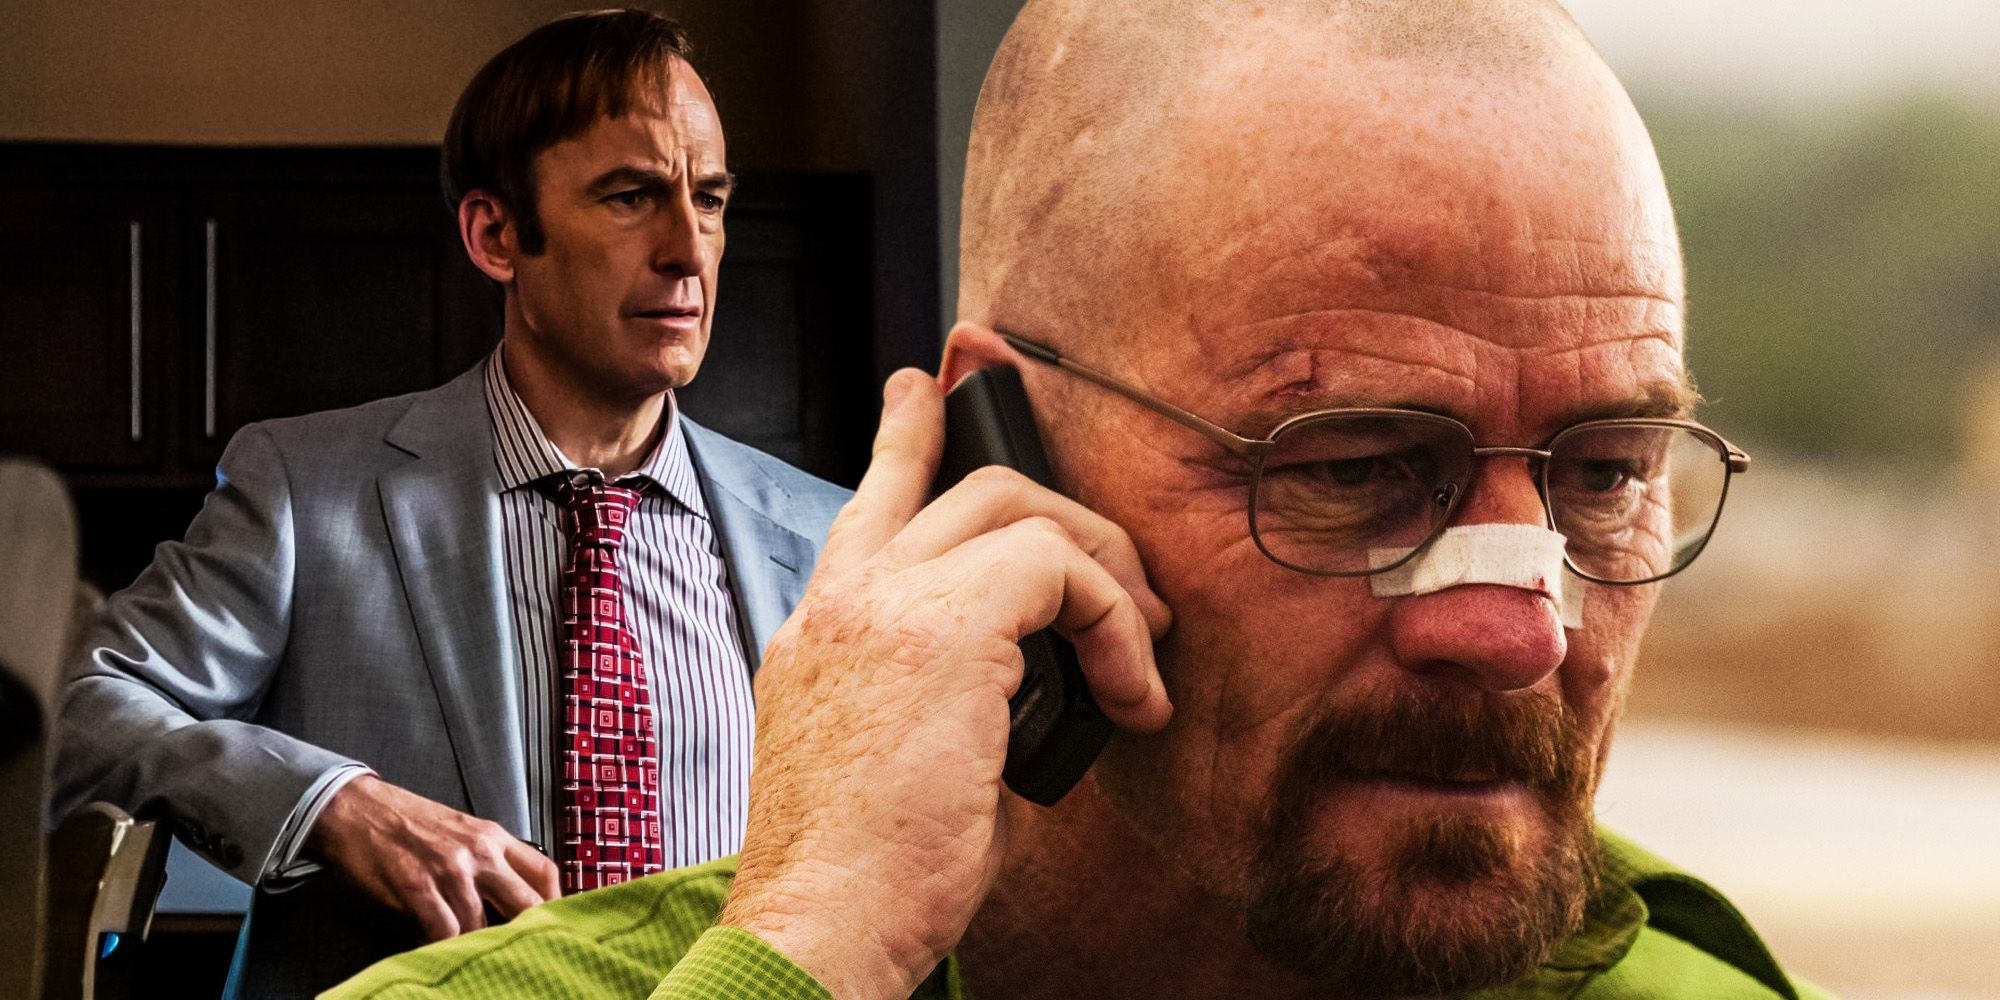 Better call saul is making walts story better already